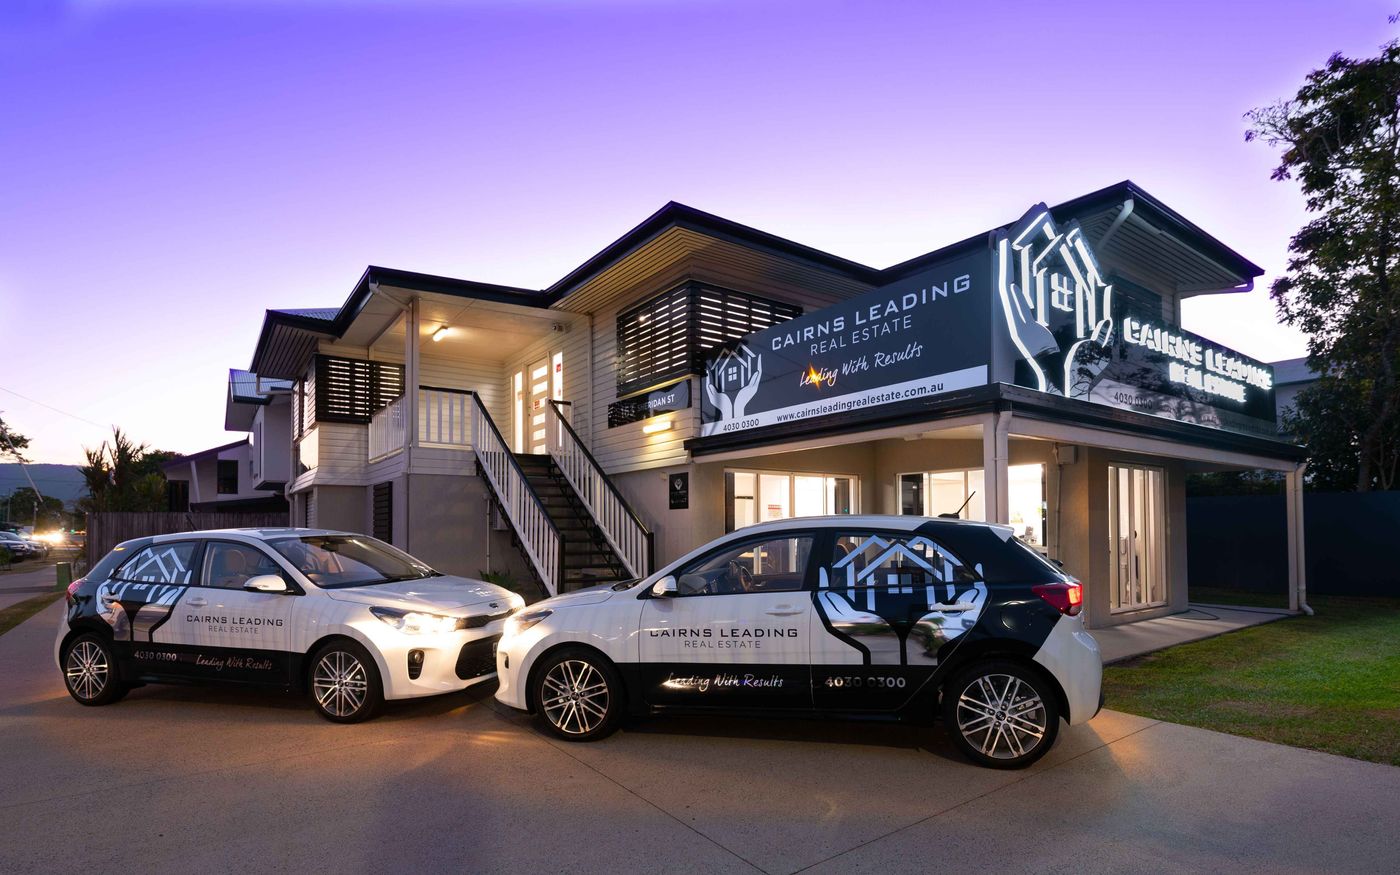 Cairns Leading Real Estate image